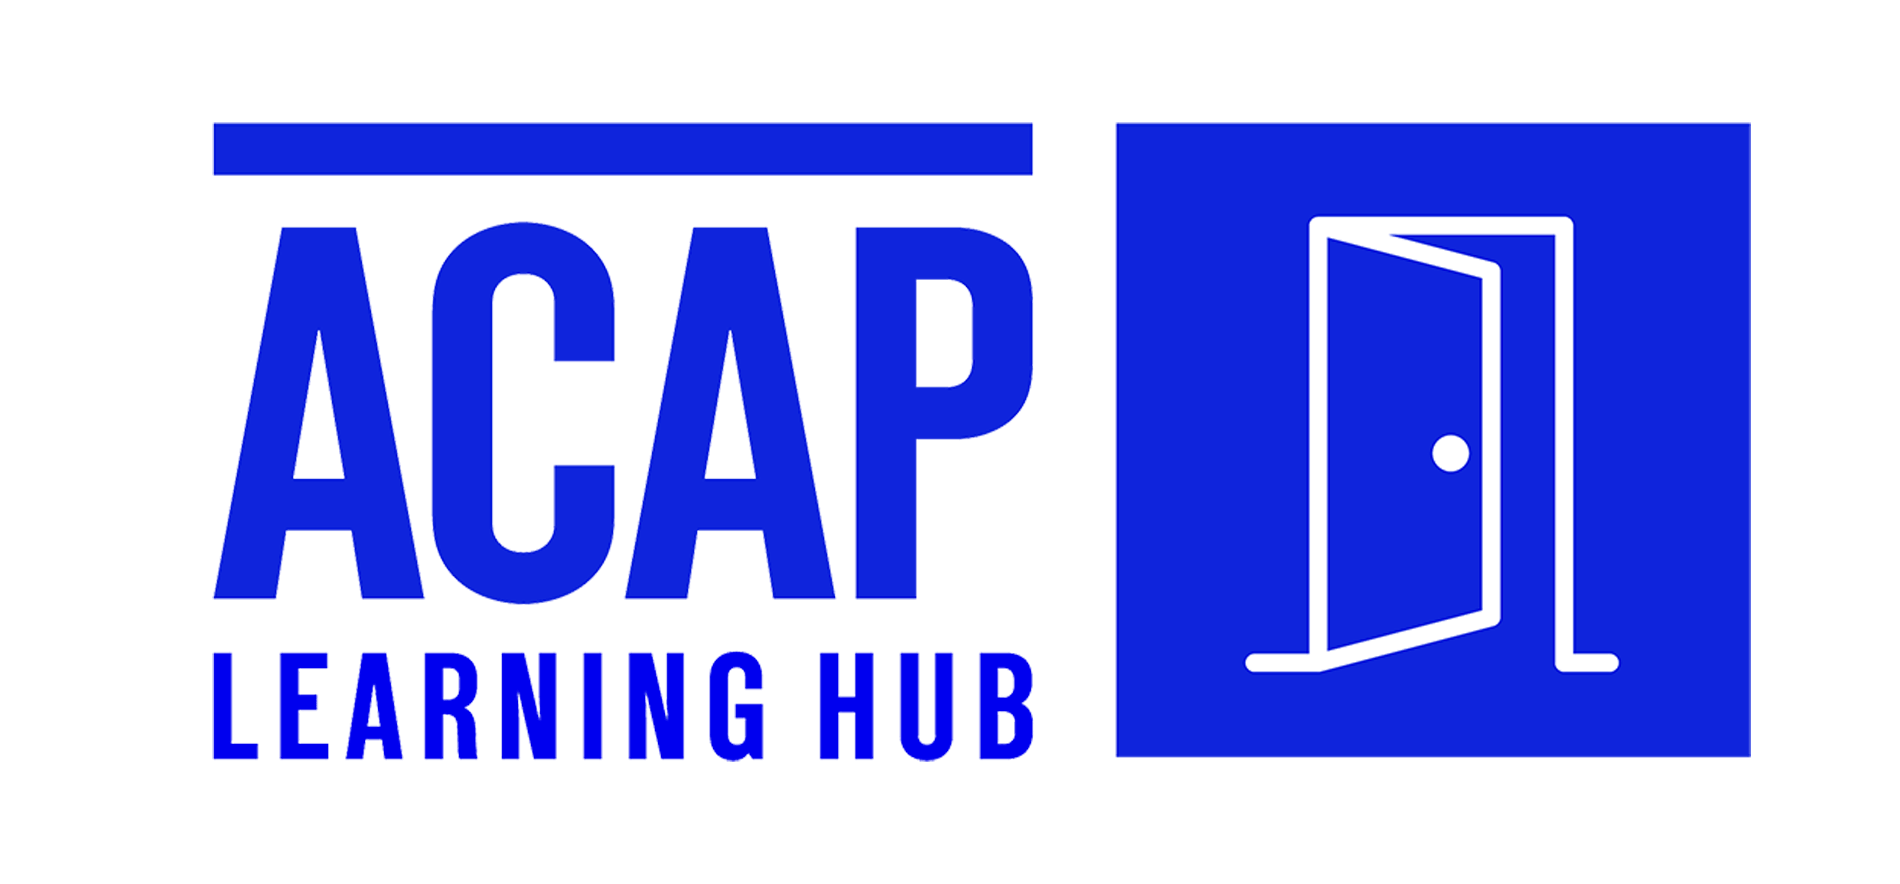 Logo with open door icon. Text reads ACAP Learning Hub